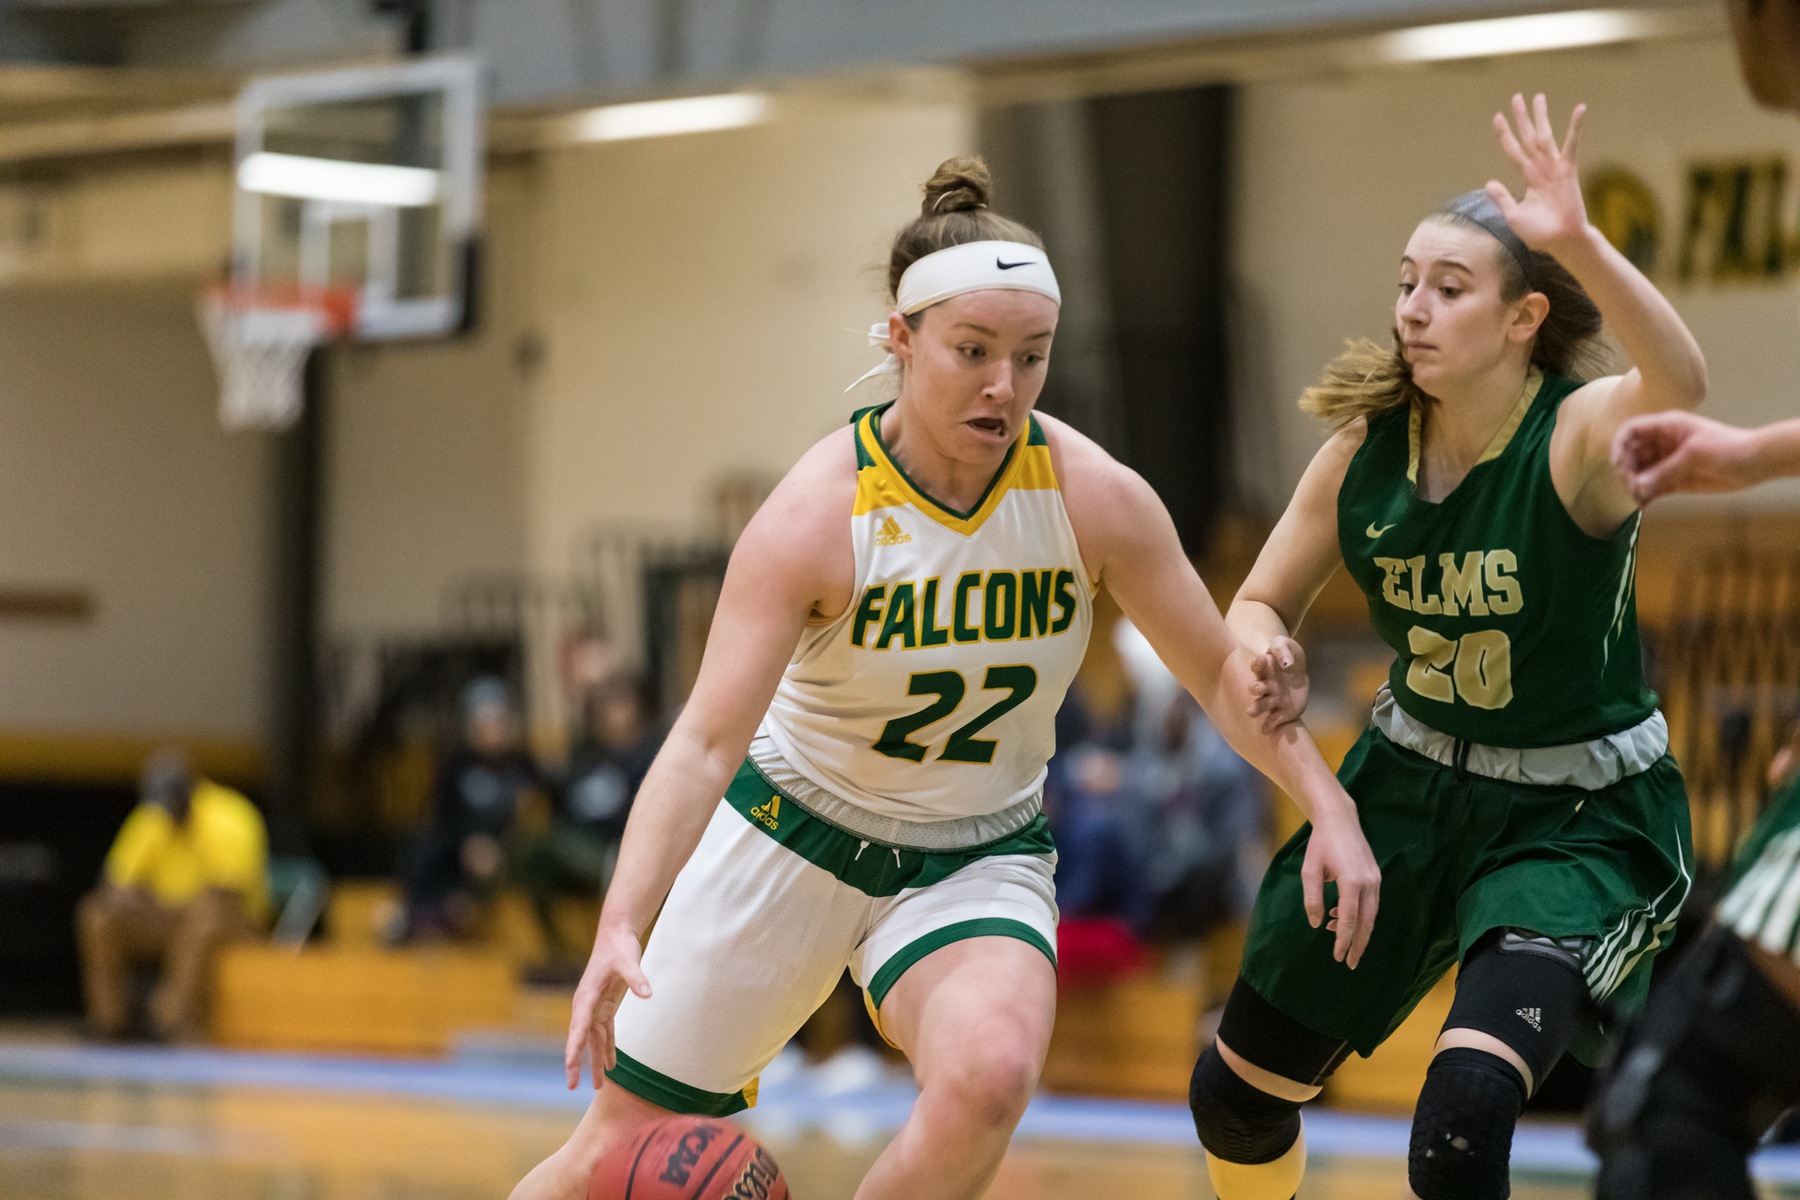 Falcons Fall To Engineers, 62-41